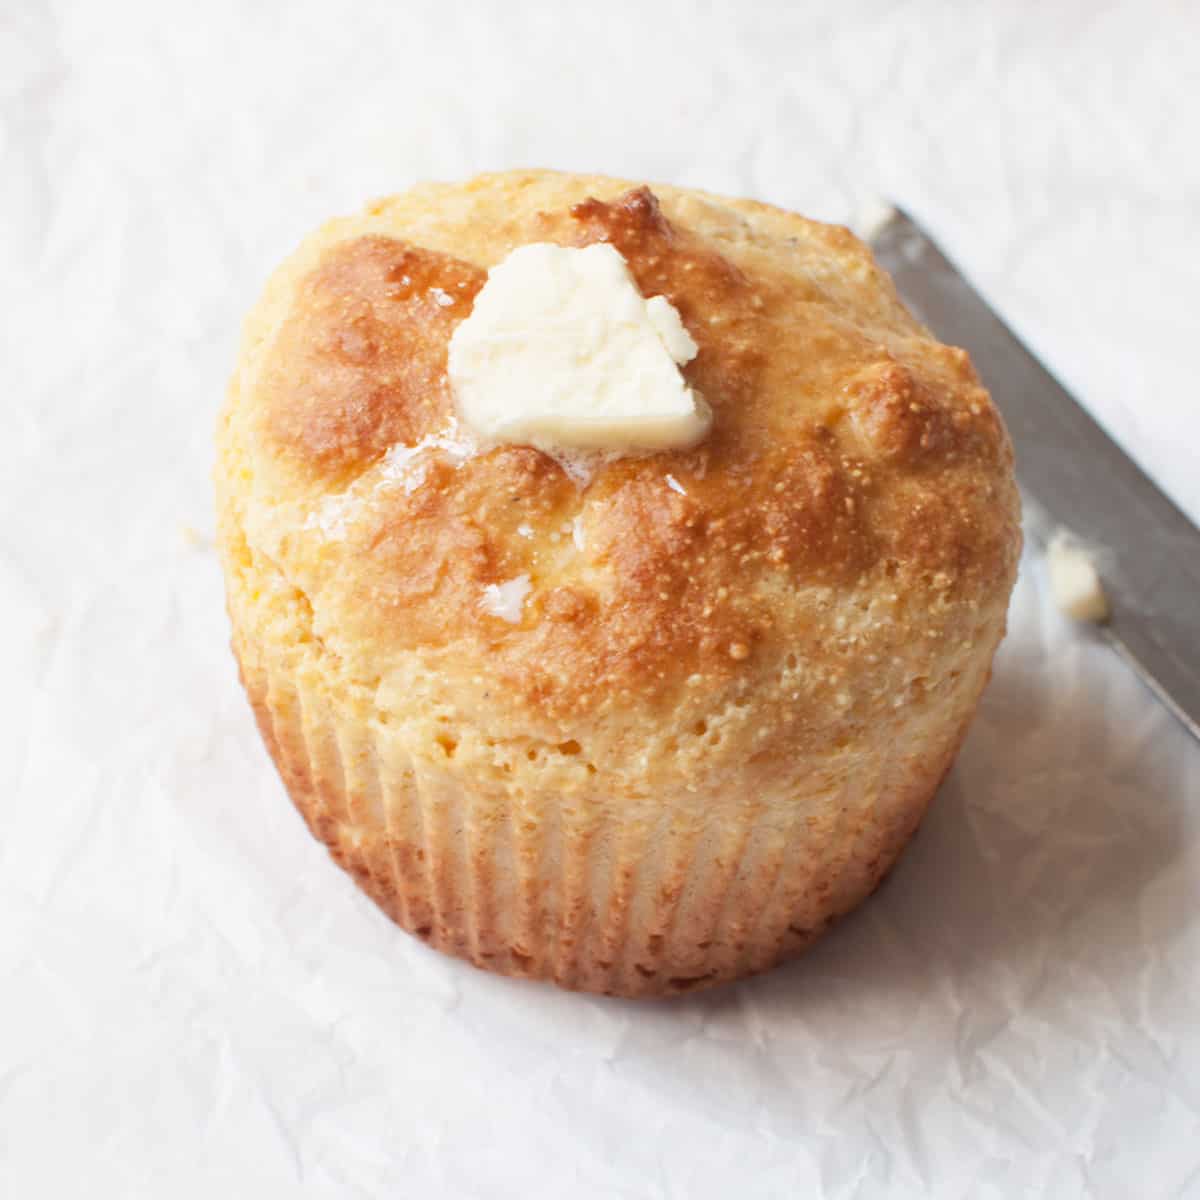 Jumbo corn muffin with butter on it. There is a butterknife in the background.